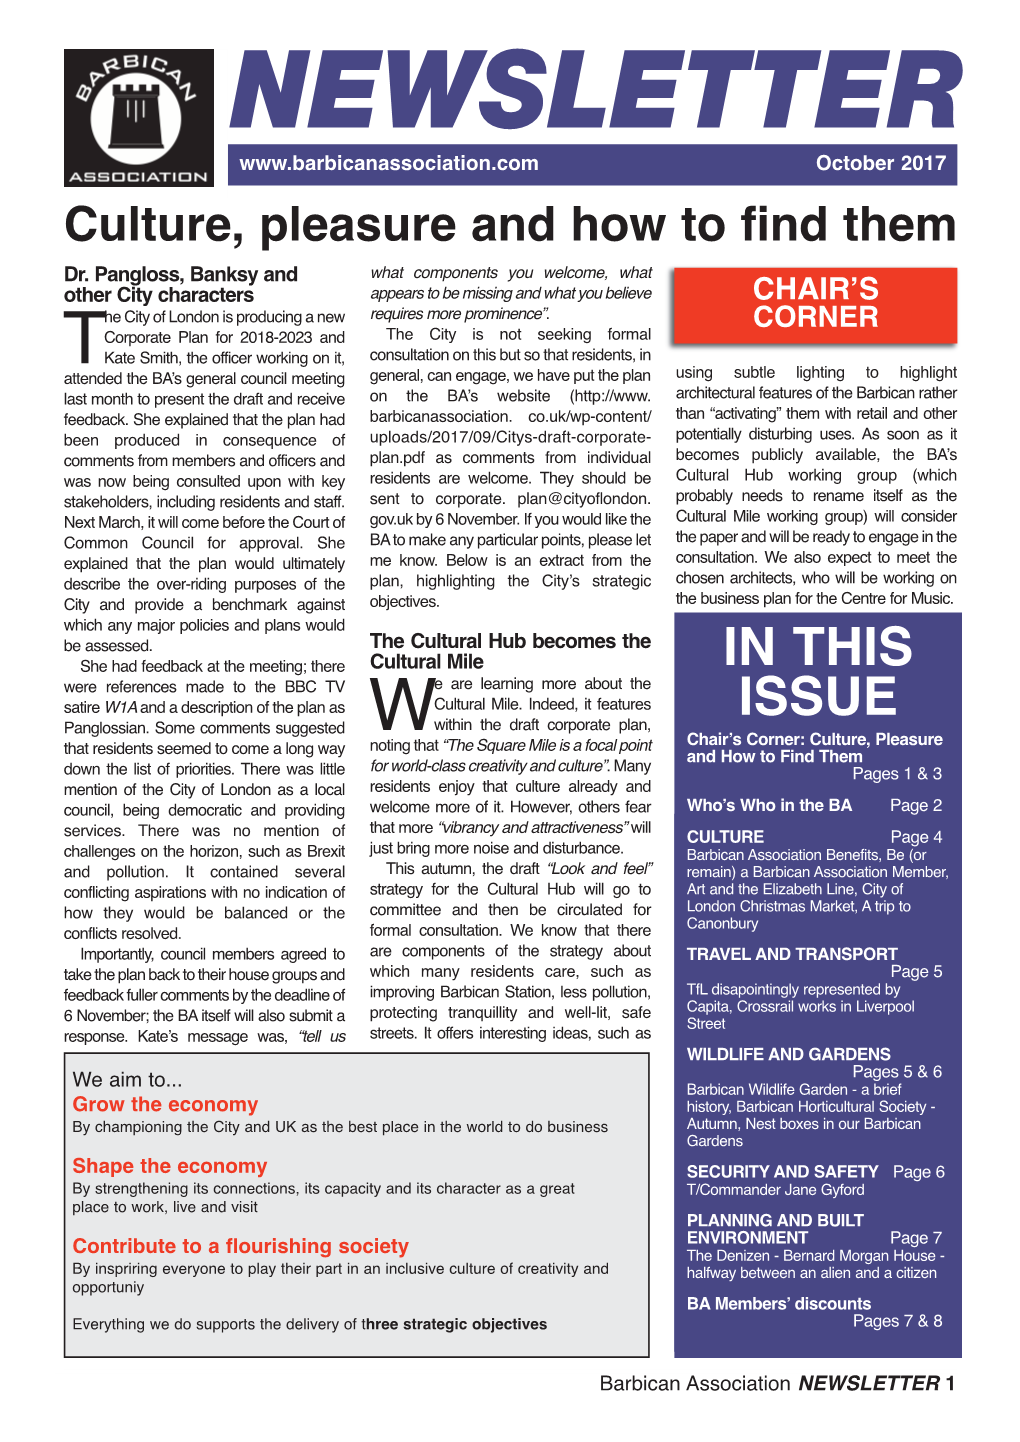 NEWSLETTER October 2017 Culture, Pleasure and How to Find Them Dr